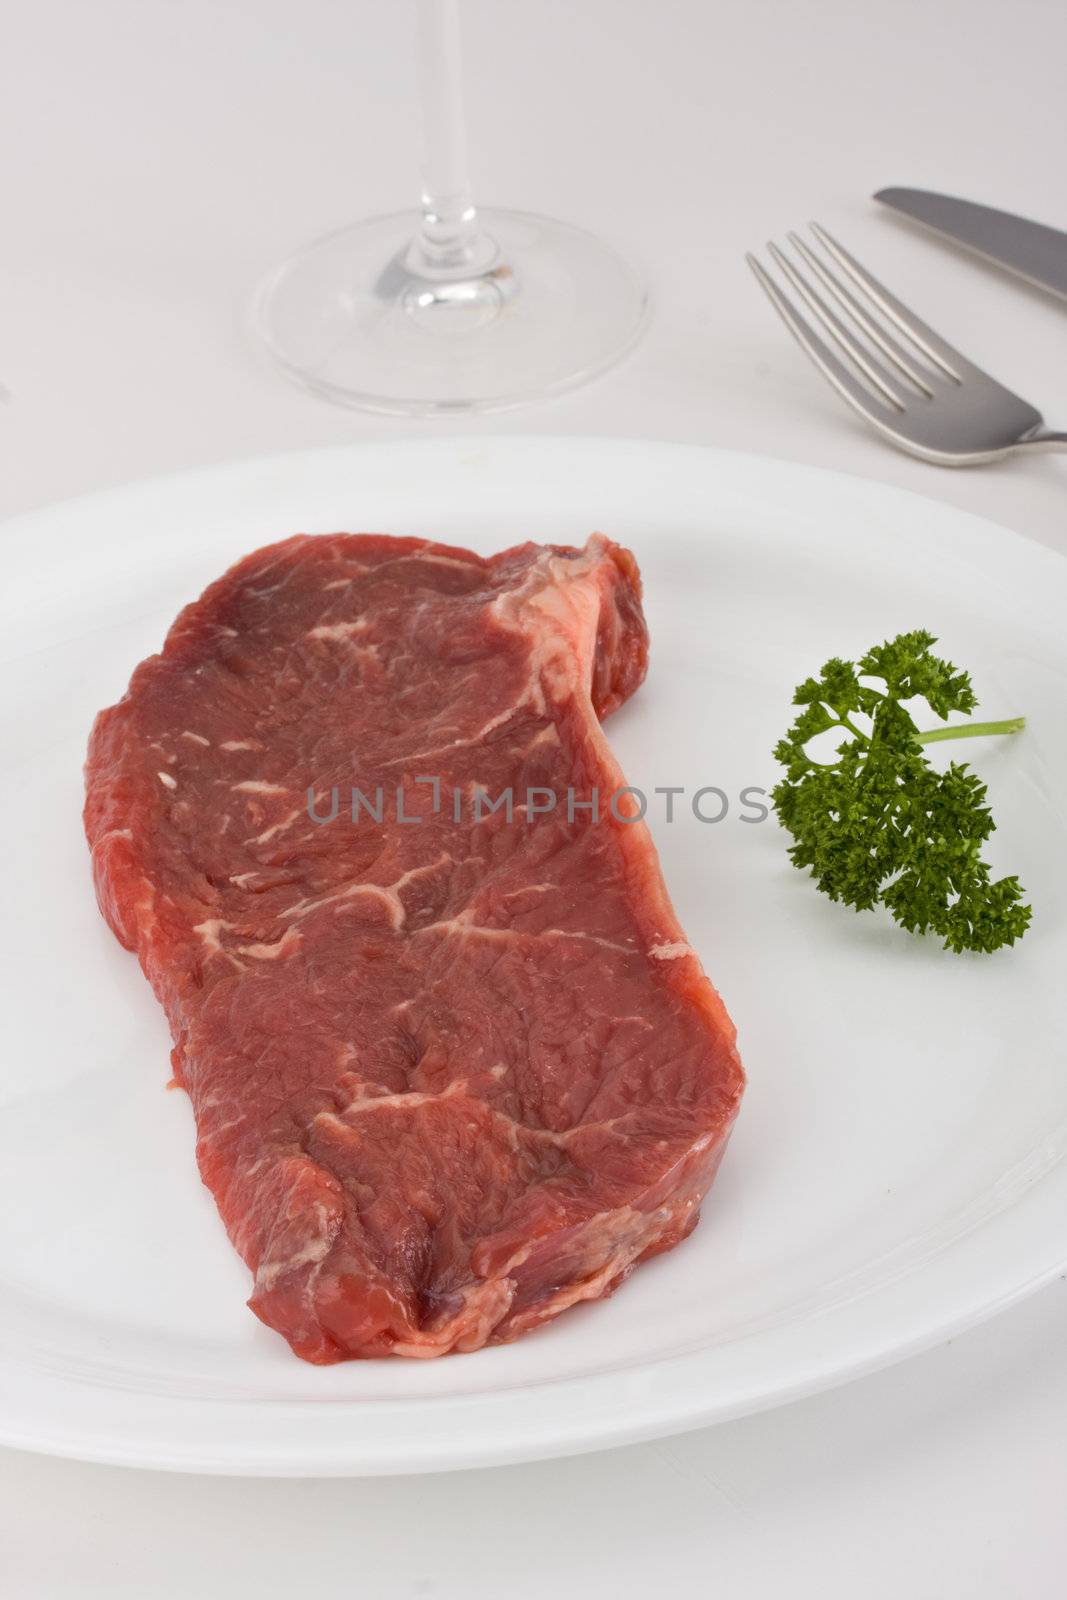 raw steak on a white plate with cutlery by bernjuer